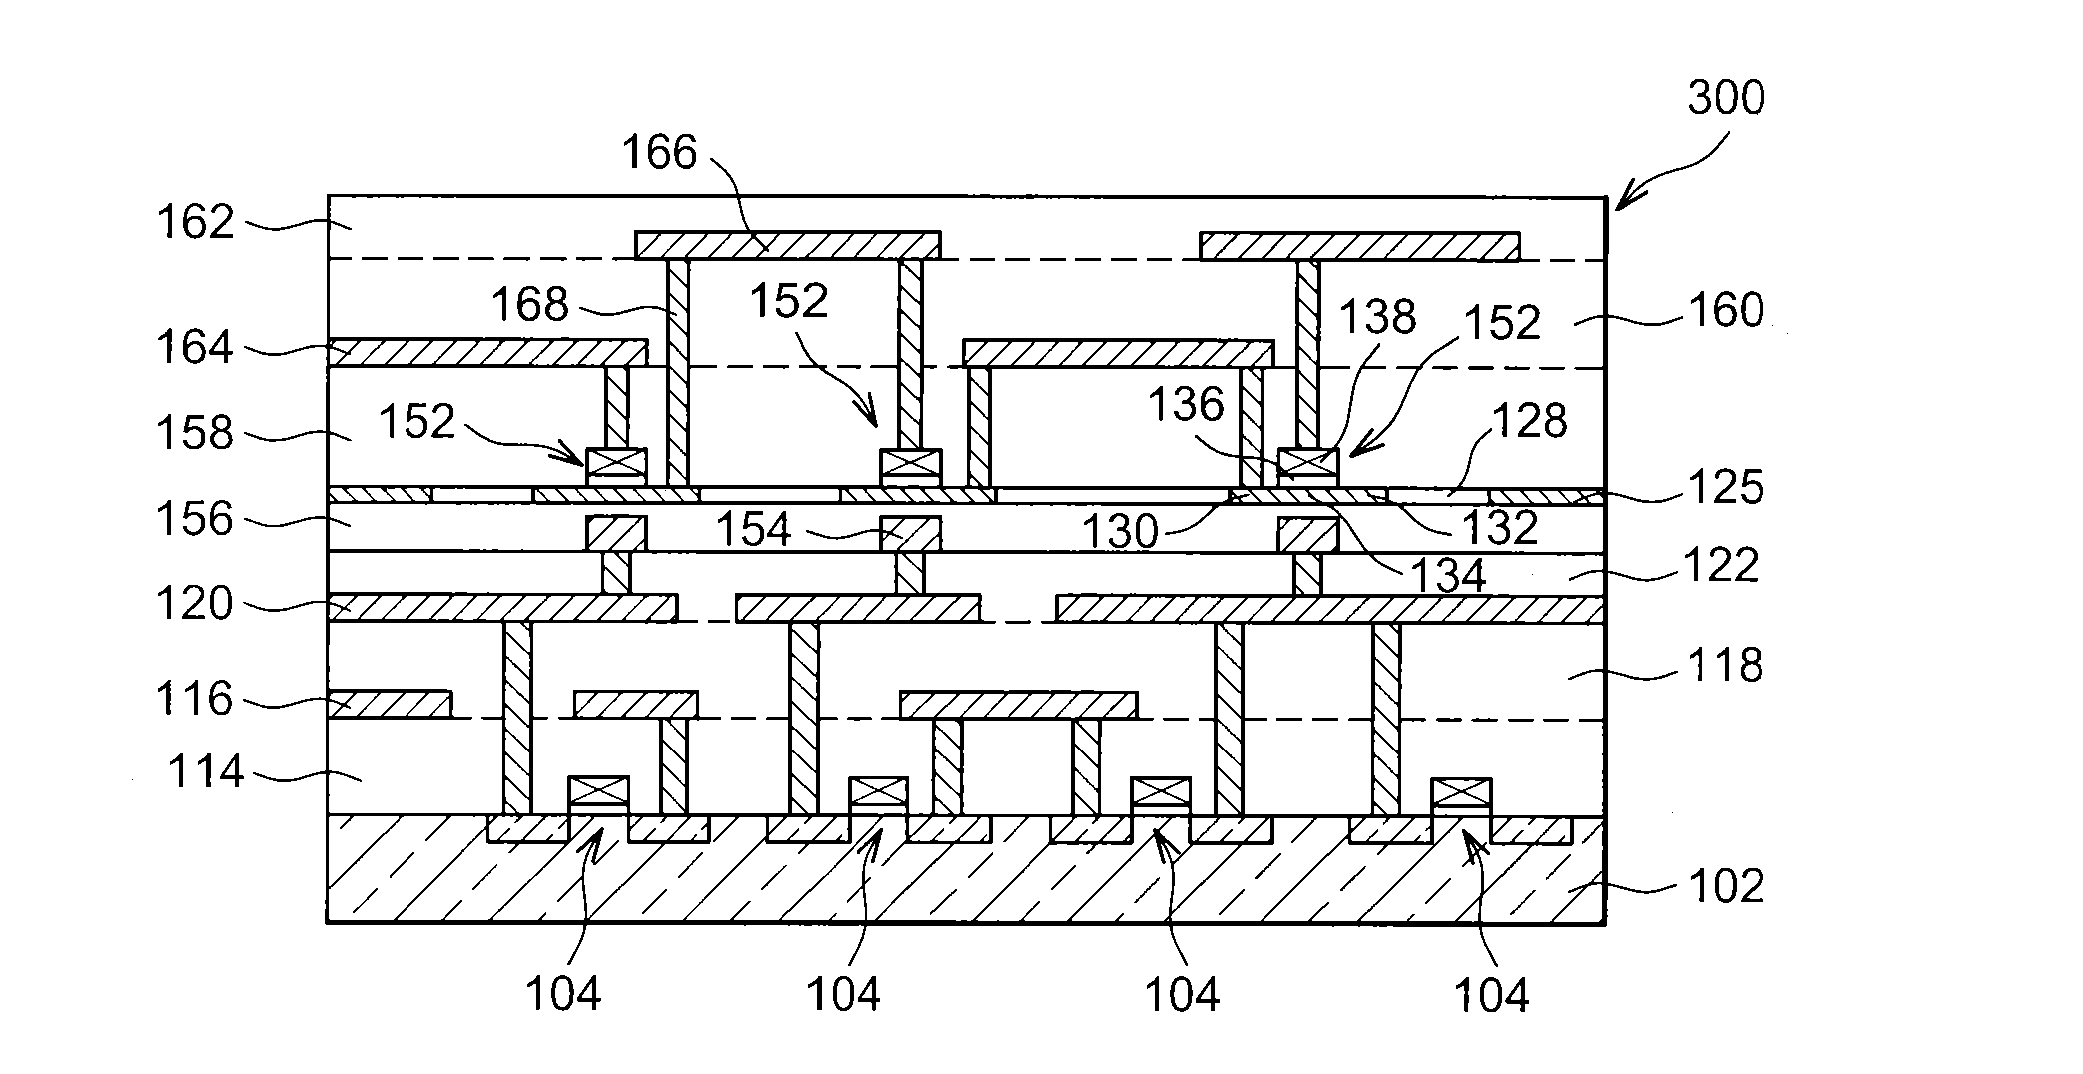 Integrated circuit having a junctionless depletion-mode fet device